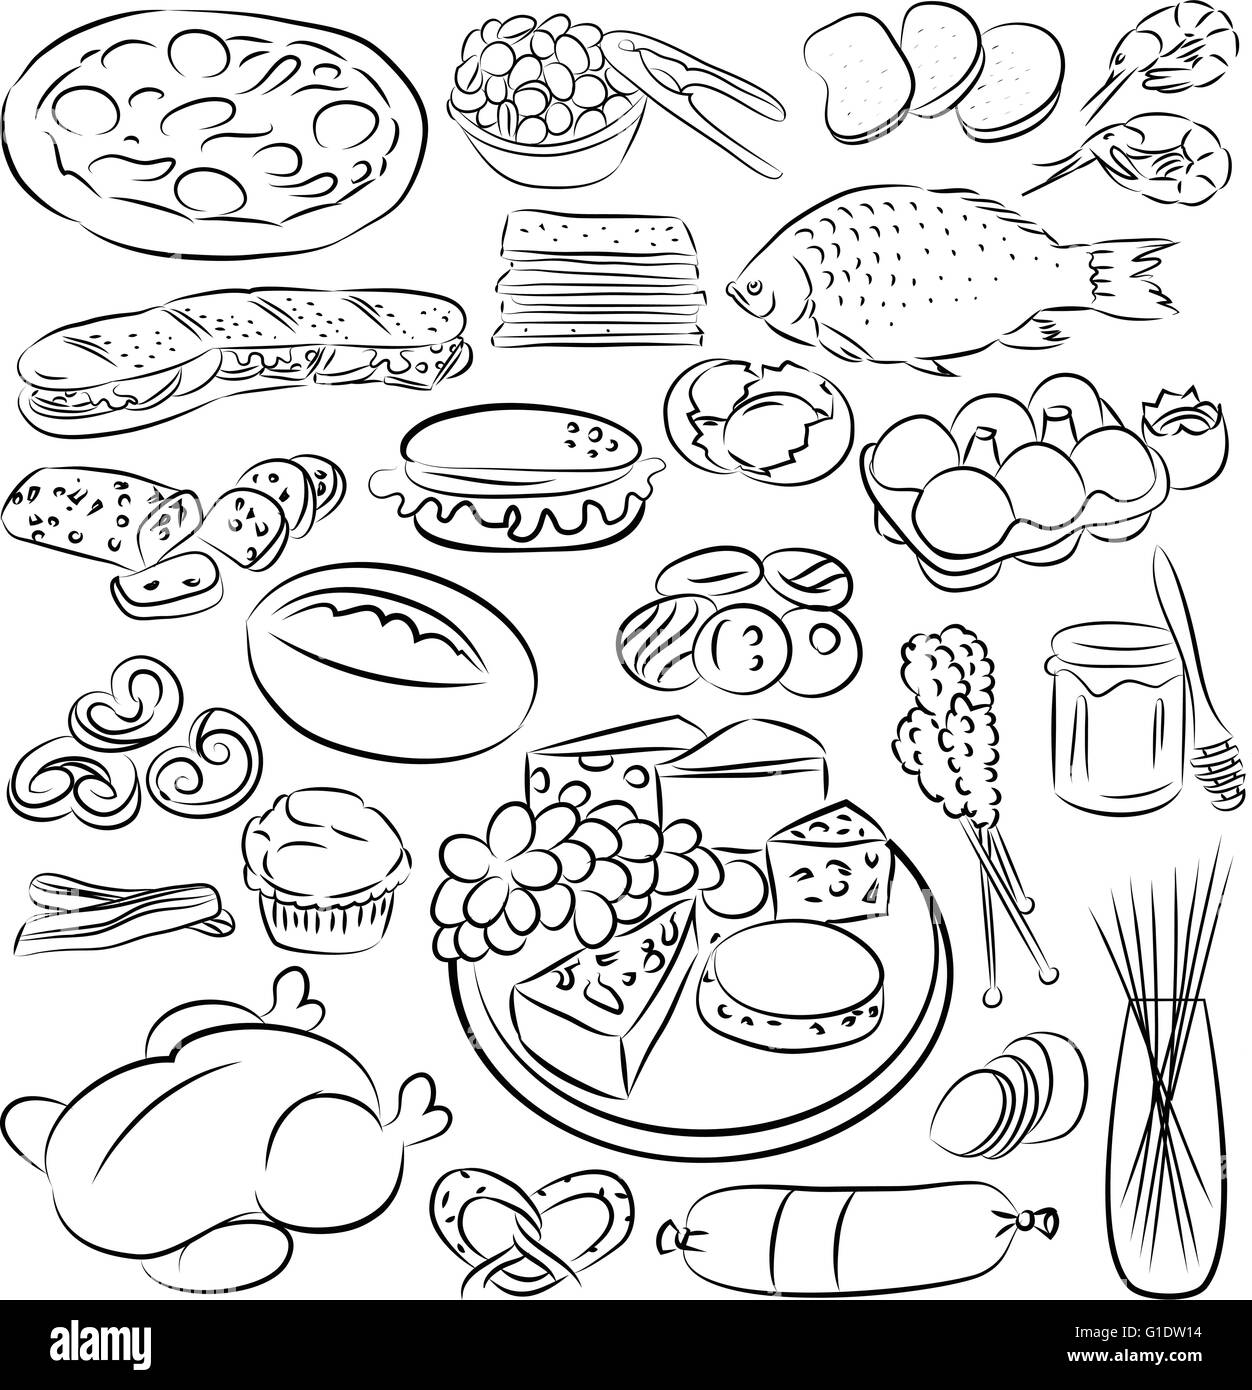 vector illustration of food collection in black and white Stock Vector